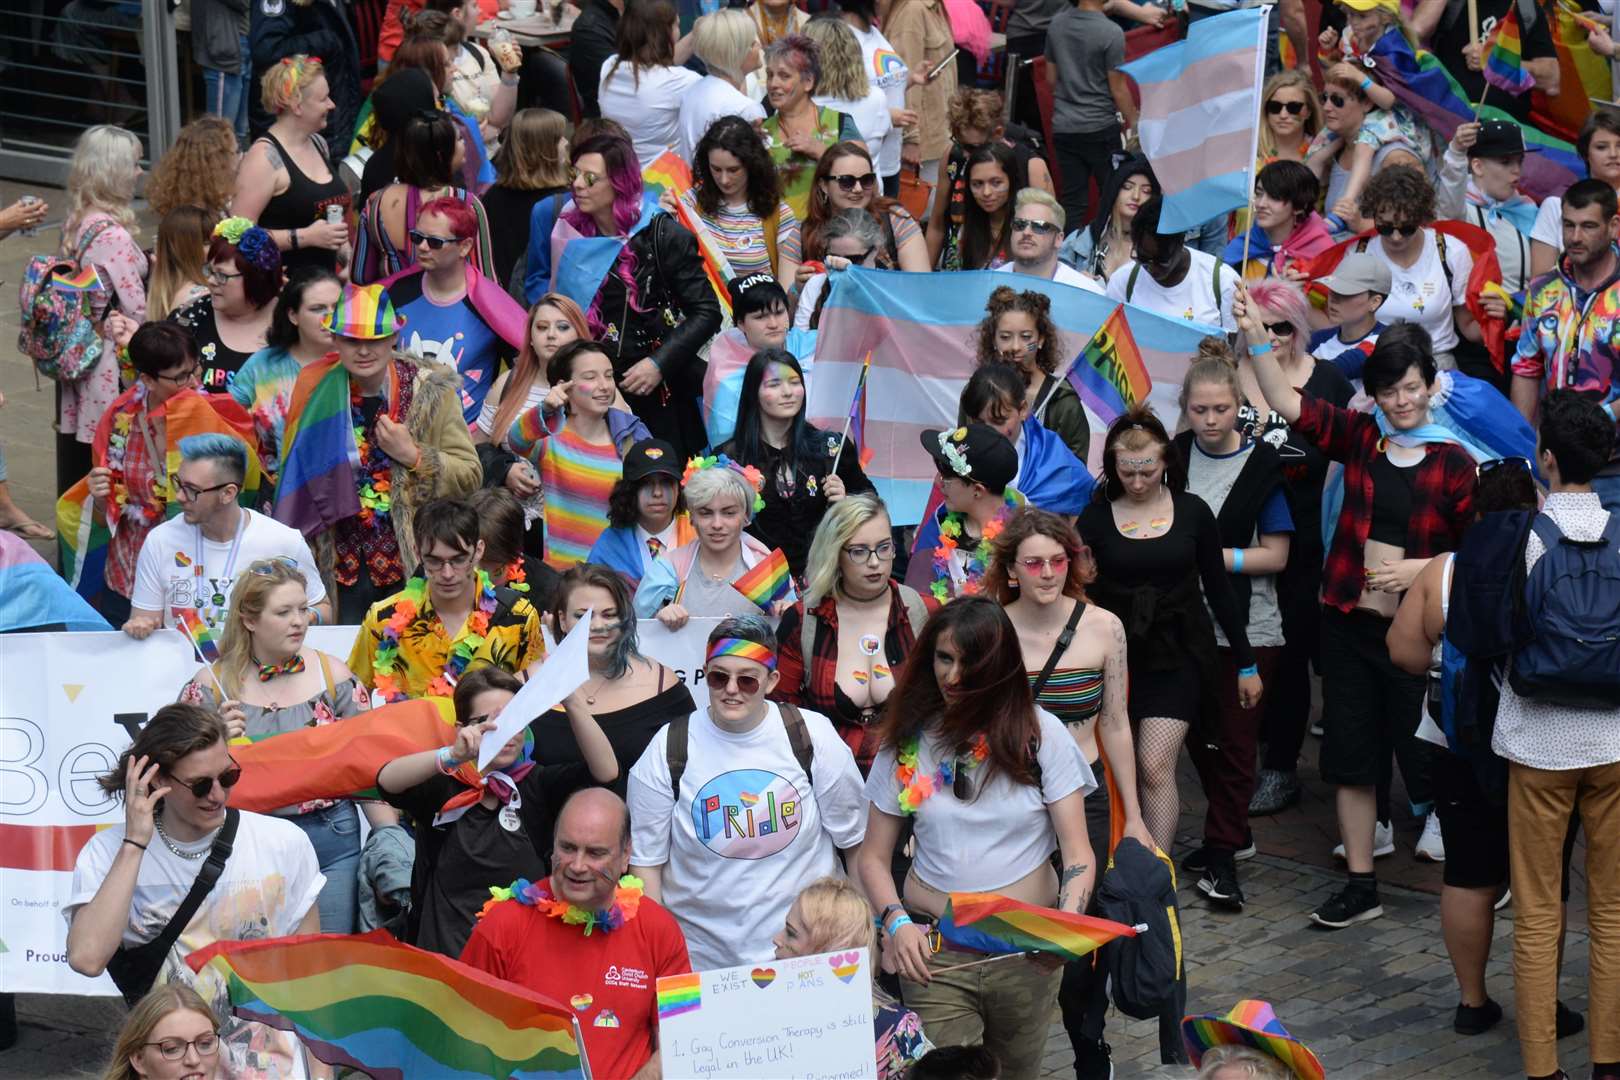 Canterbury's Pride festival is taking place this weekend